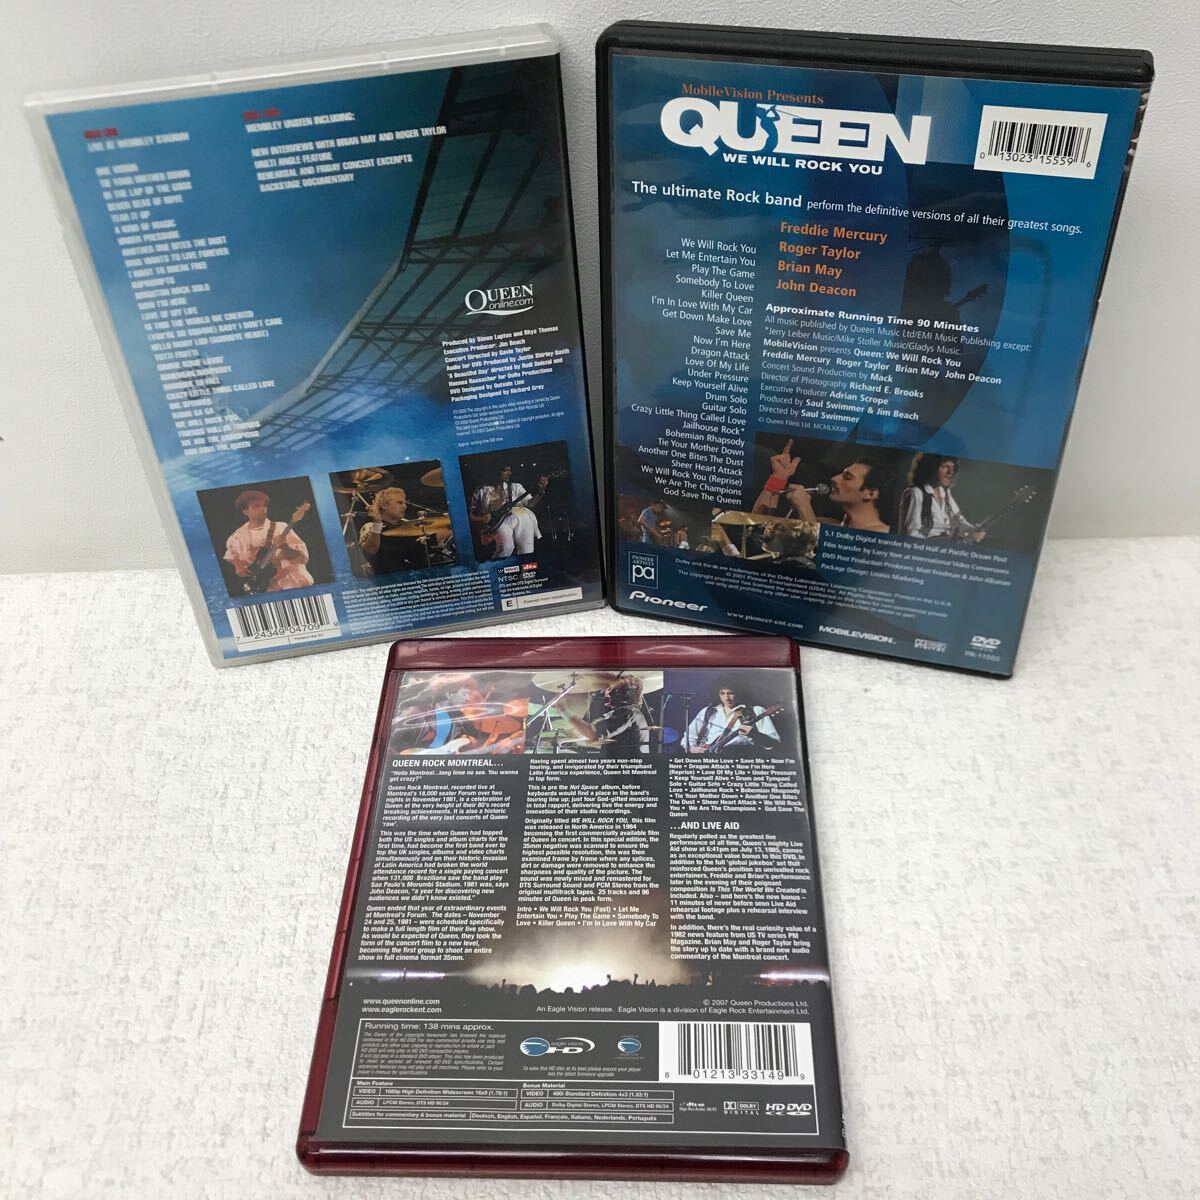 I0513A3 QUEEN クイーン DVD 3巻セット セル版 音楽 洋楽 LIVE AT WEMBLEY STADIUM / WE WILL ROCK YOU / ROCK MONTREAL & LIVE AID_画像2